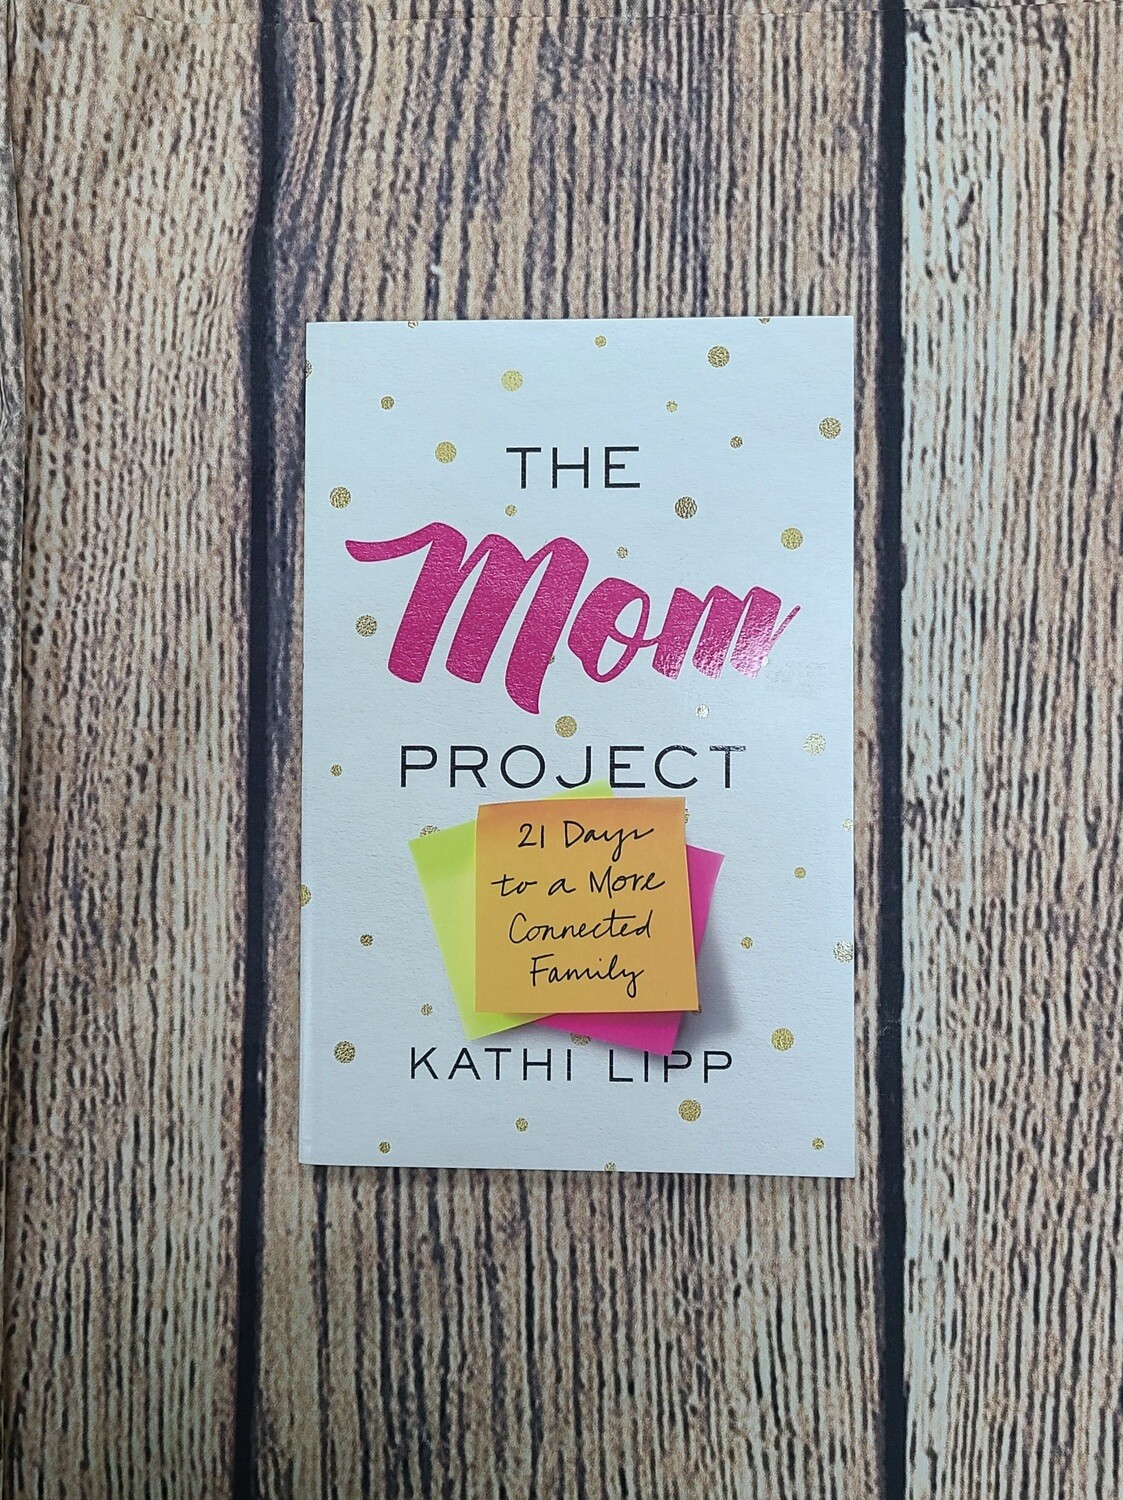 The Mom Project by Kathi Lipp